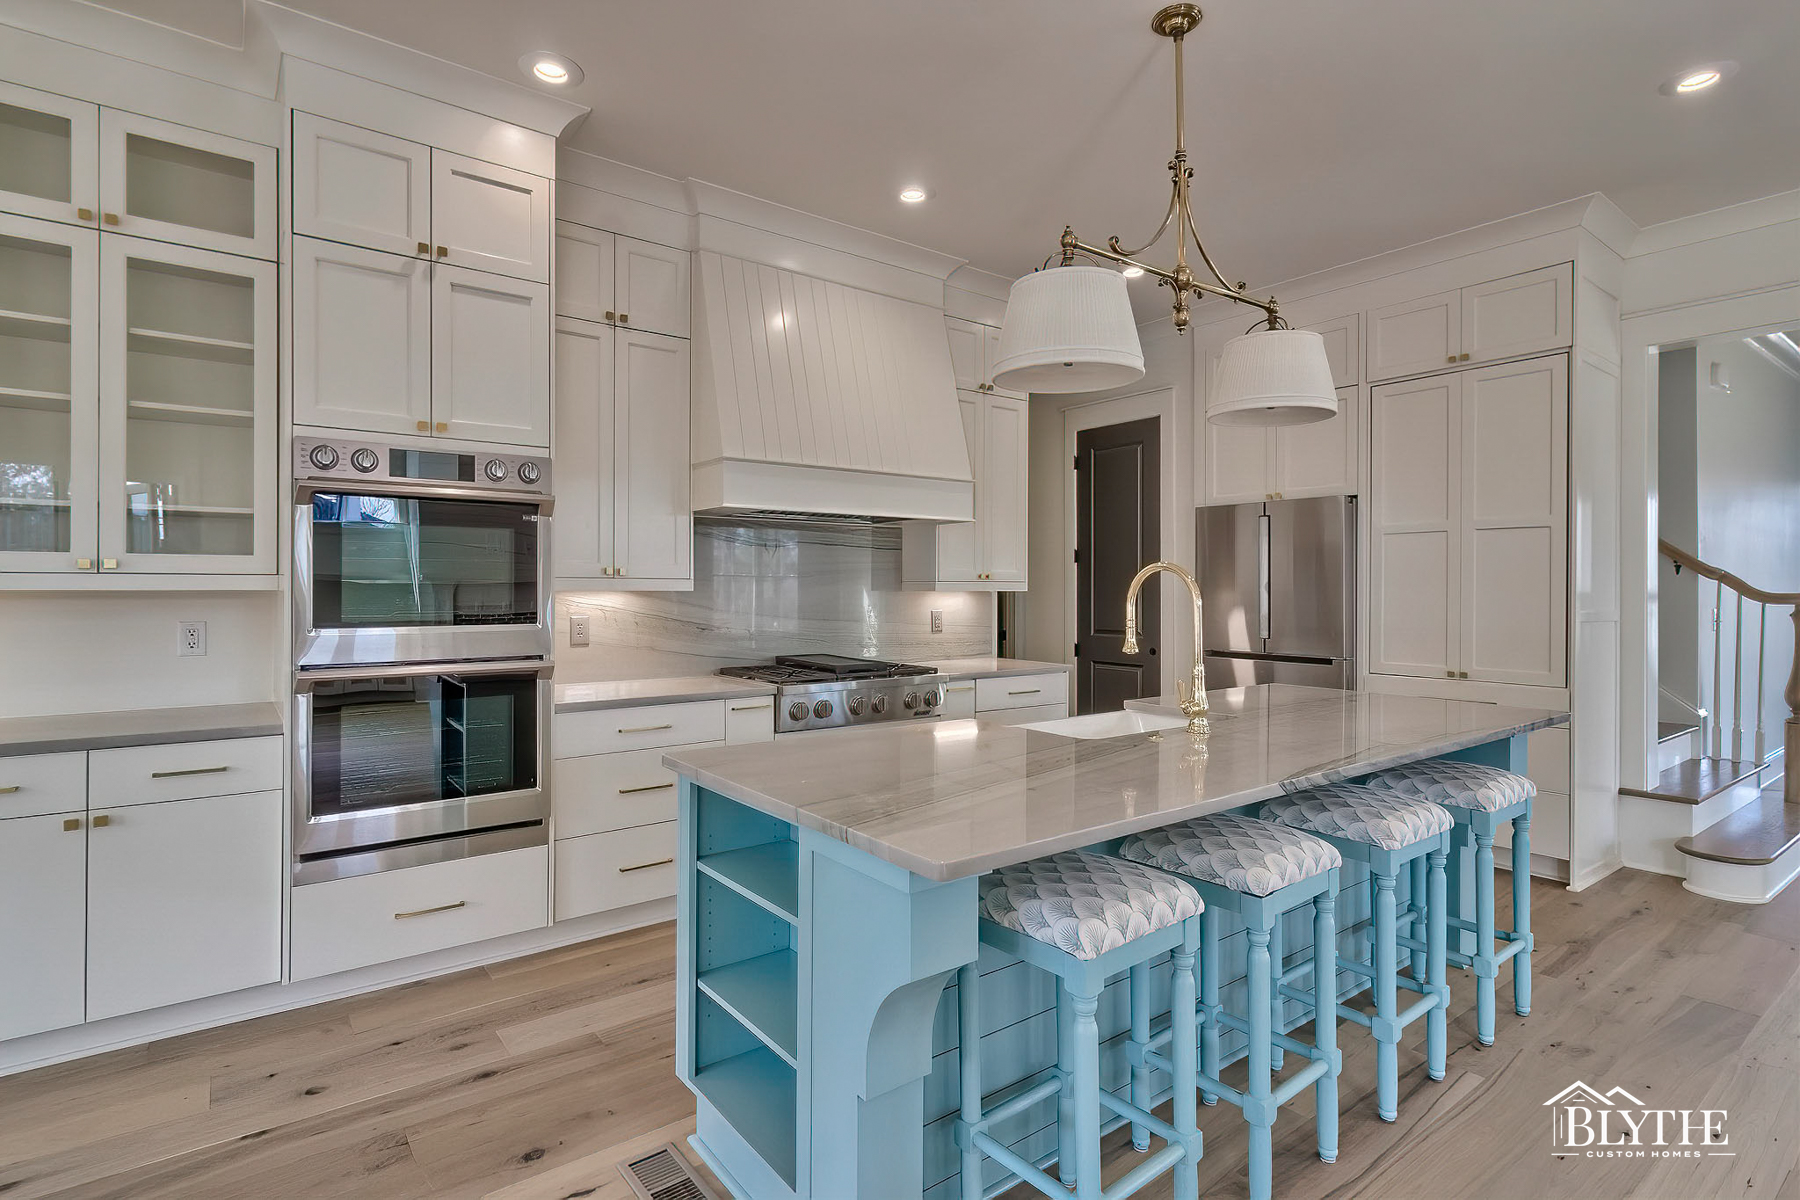 Powder blue kitchen island with four padded stools and kitchen with white floor-to-ceiling shaker cabinets and stainless steel appliances.